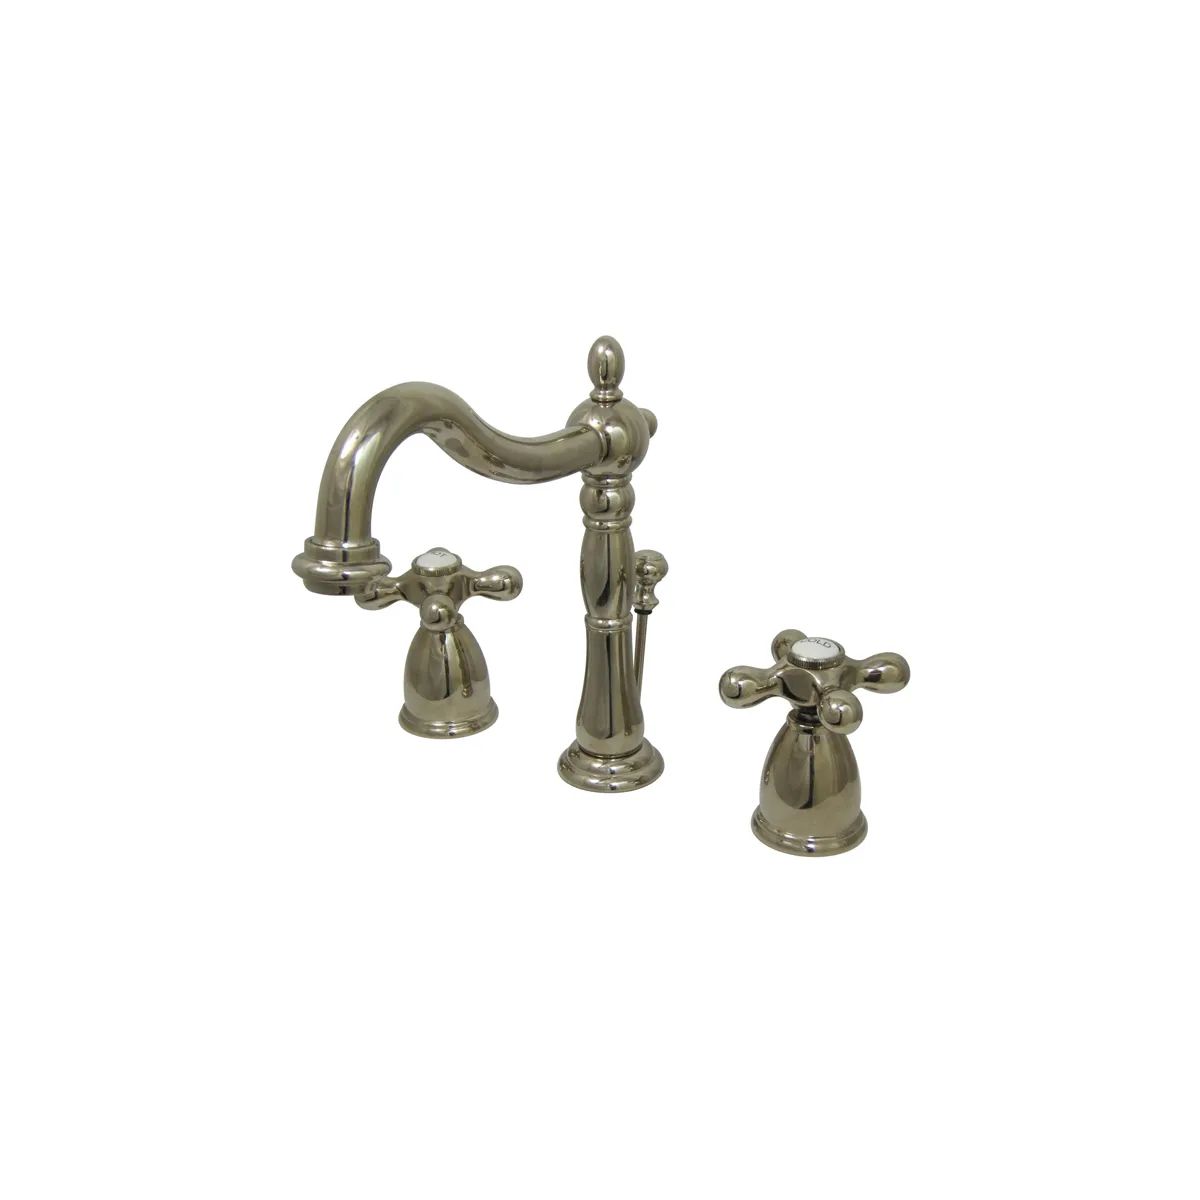 Heritage 1.2 GPM Widespread Bathroom Faucet with Pop-Up Drain Assembly | Build.com, Inc.